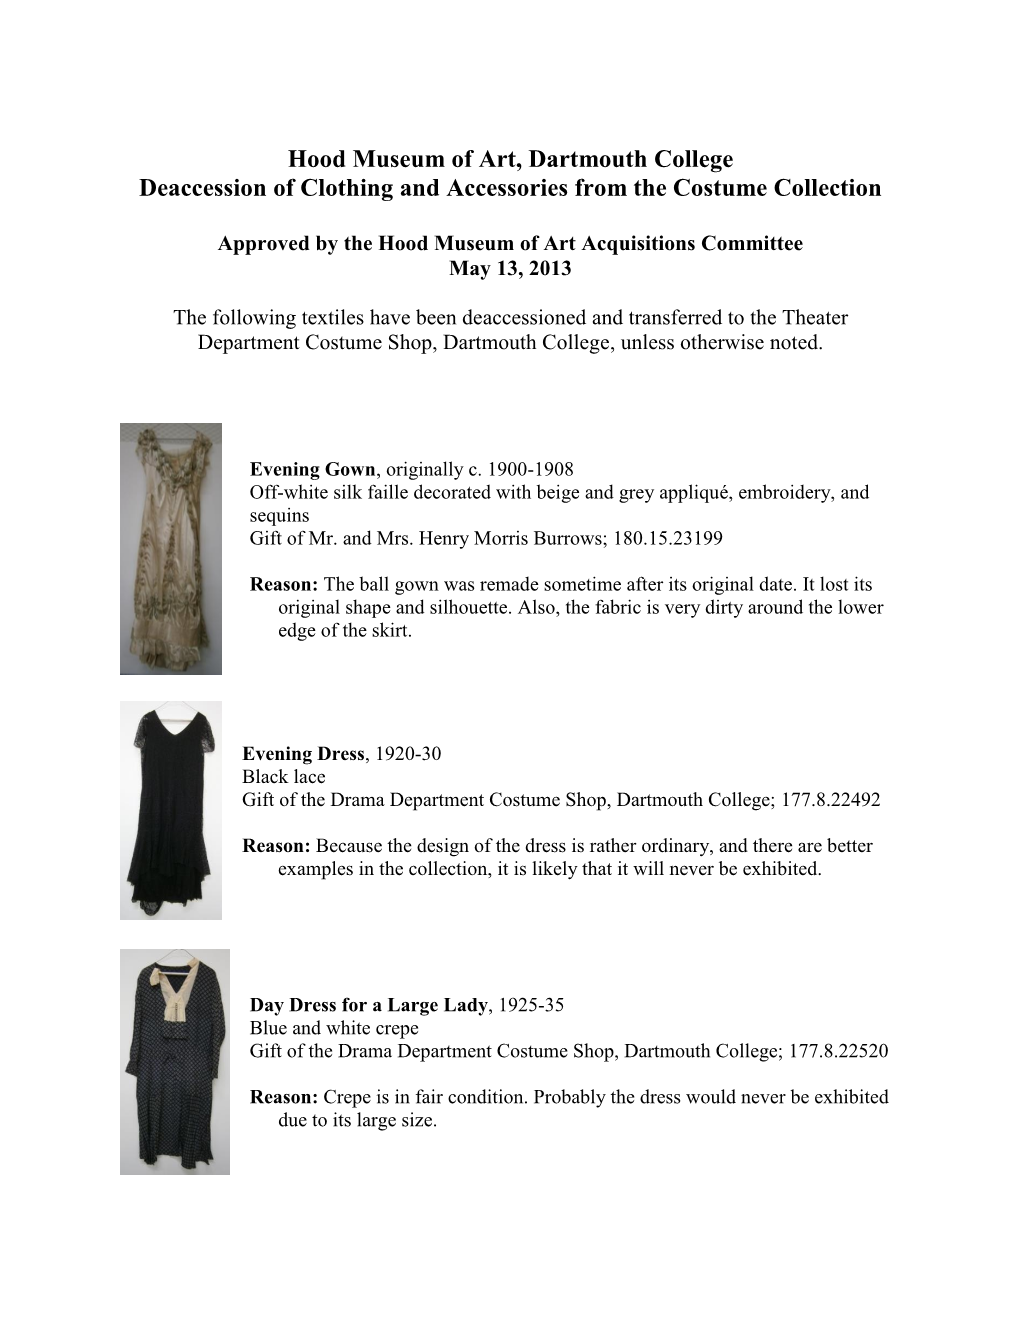 Hood Museum of Art, Dartmouth College Deaccession of Clothing and Accessories from the Costume Collection